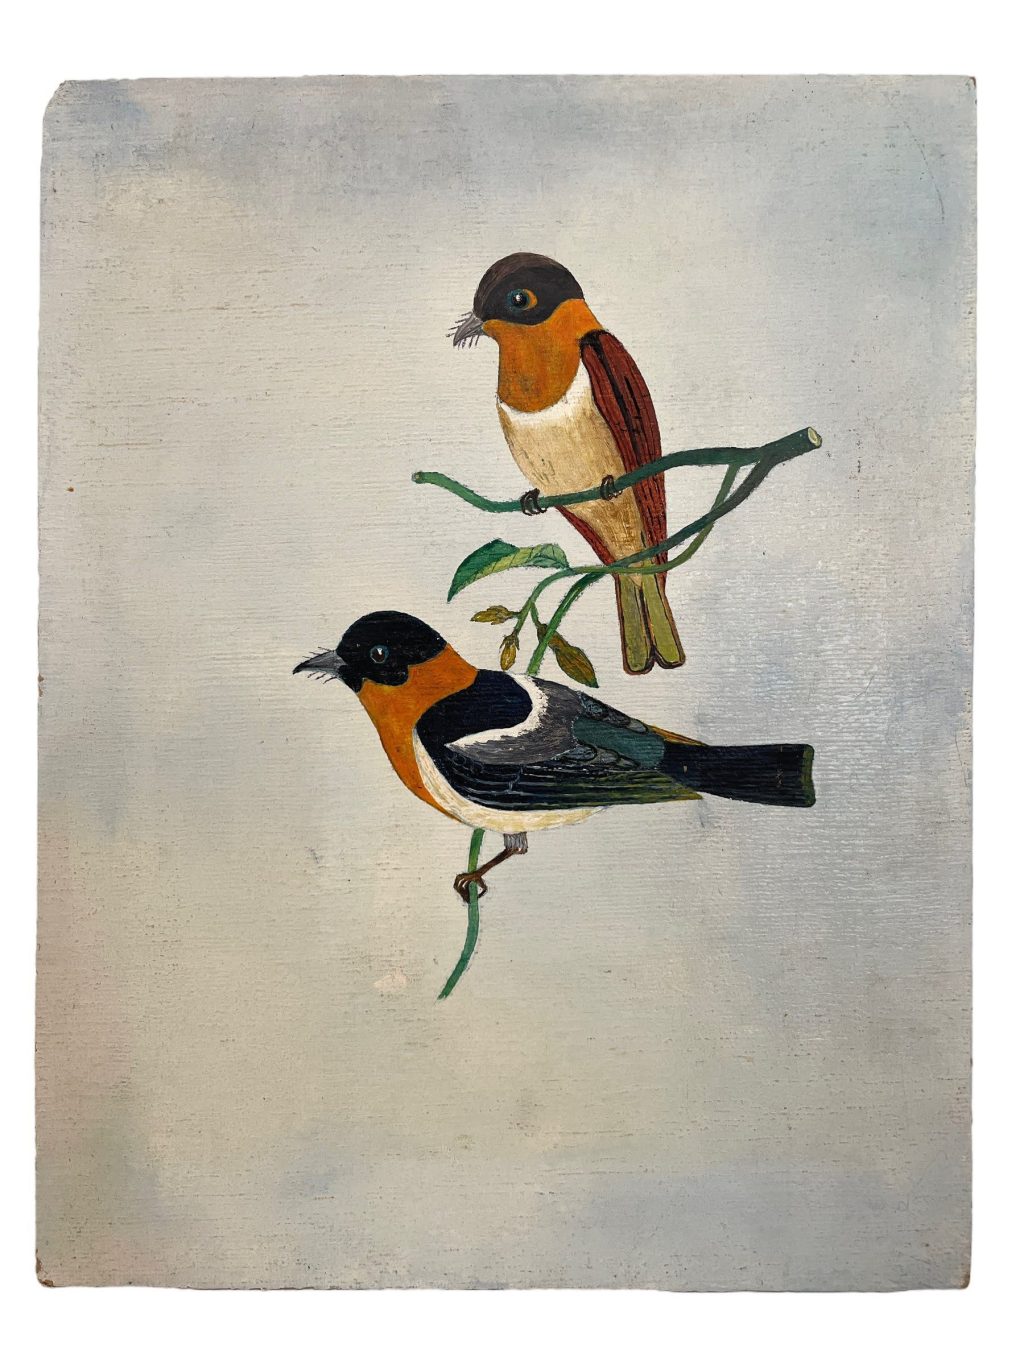 Vintage French Bird On Branch Study Acrylic Painting On Card Nieve Folk Art Picture Wall Hanging Art c1960-70’s